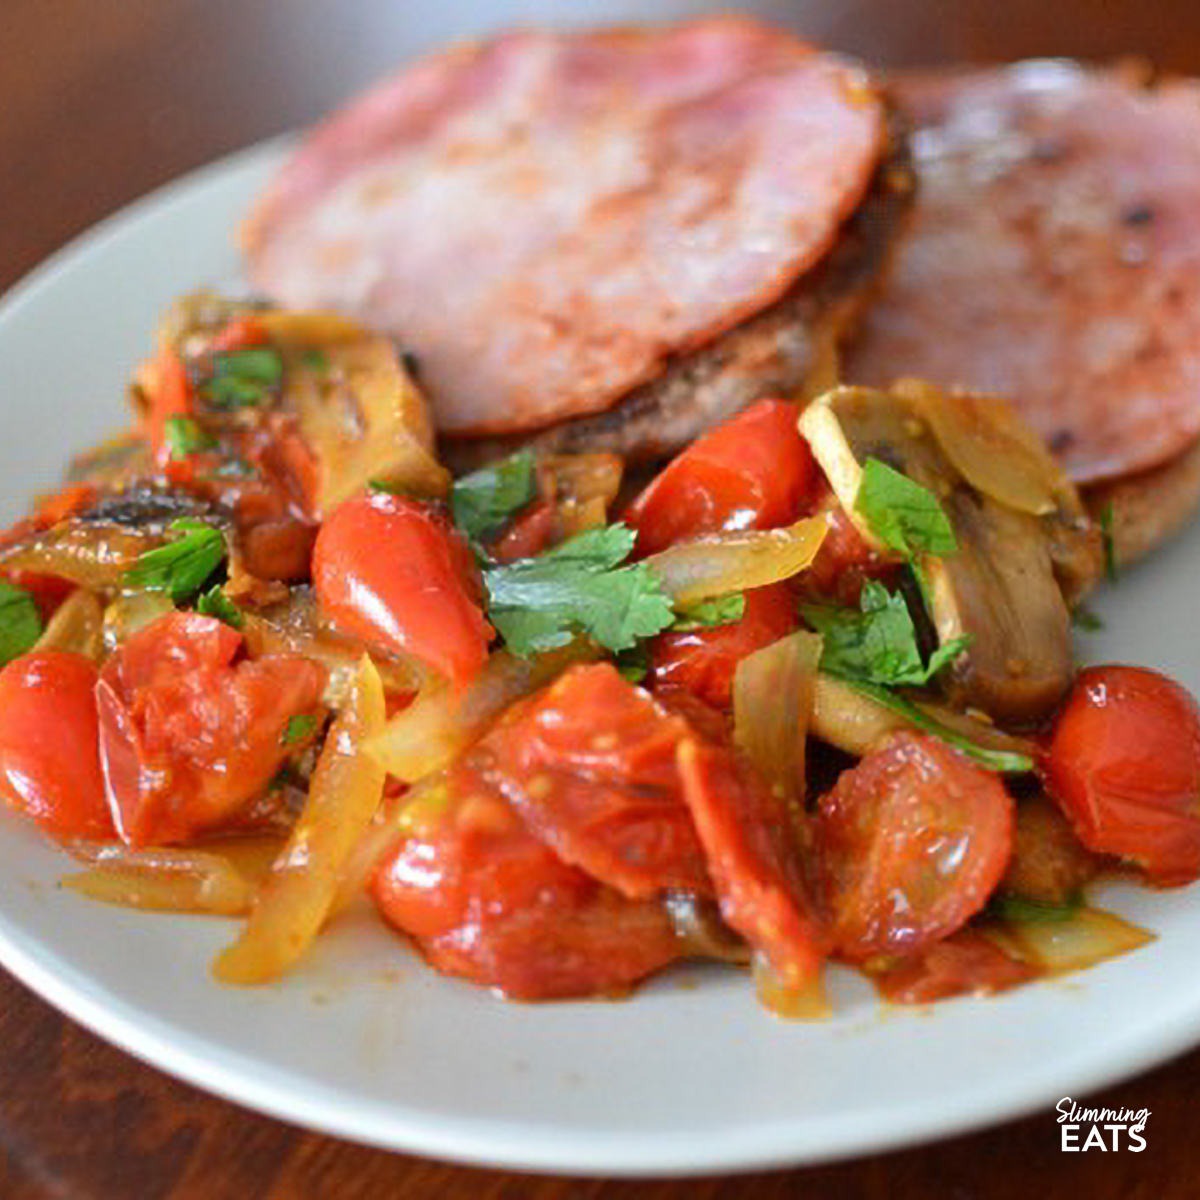 Golden pan-fried Canadian bacon atop toasted English muffins, accompanied by sautéed sweet tomatoes with onion and mushrooms, garnished with parsley.